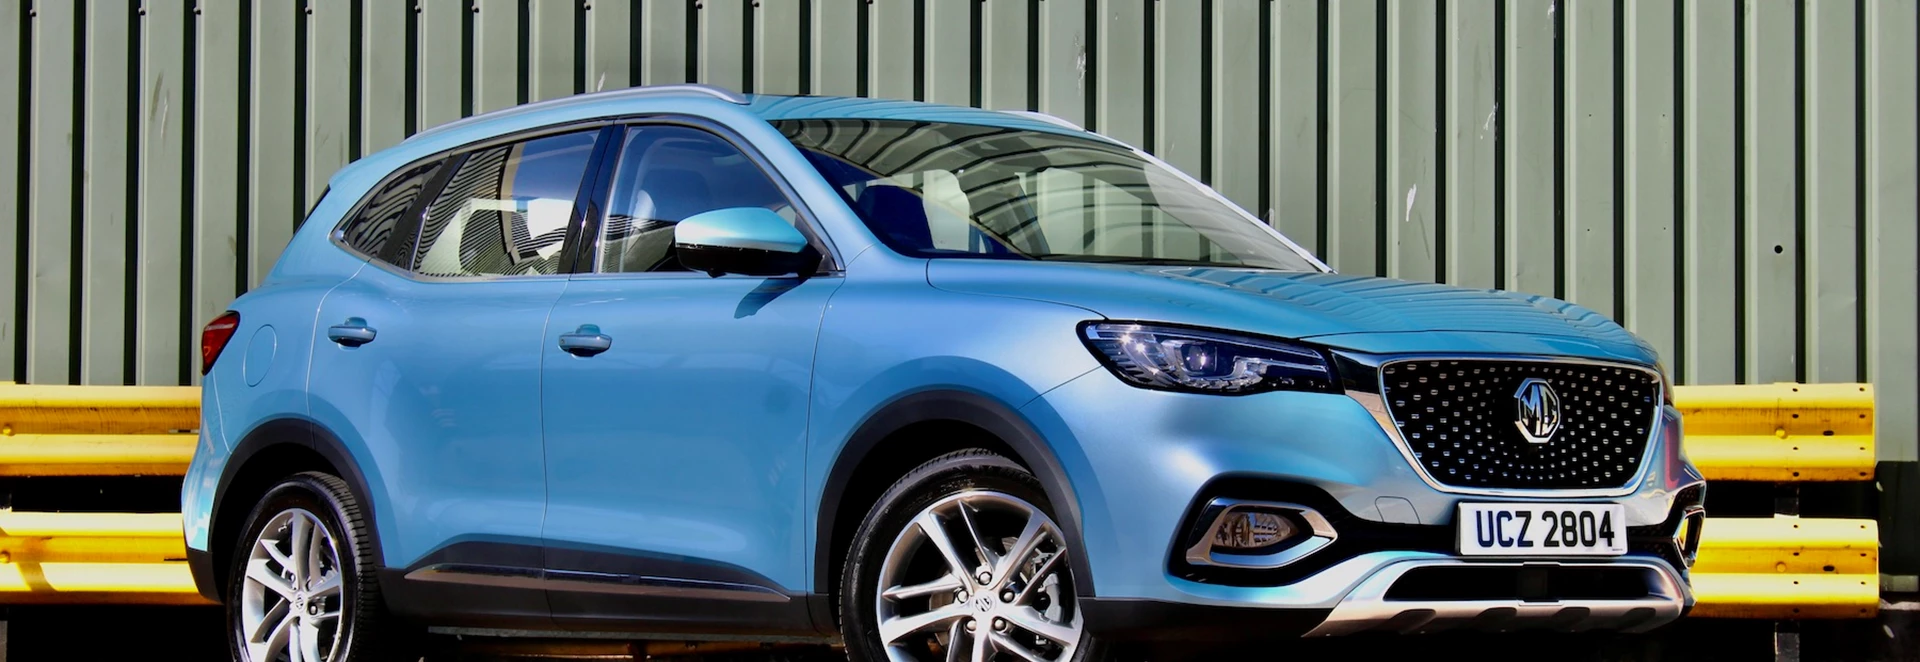 MG HS range expanded with new plug-in hybrid model 